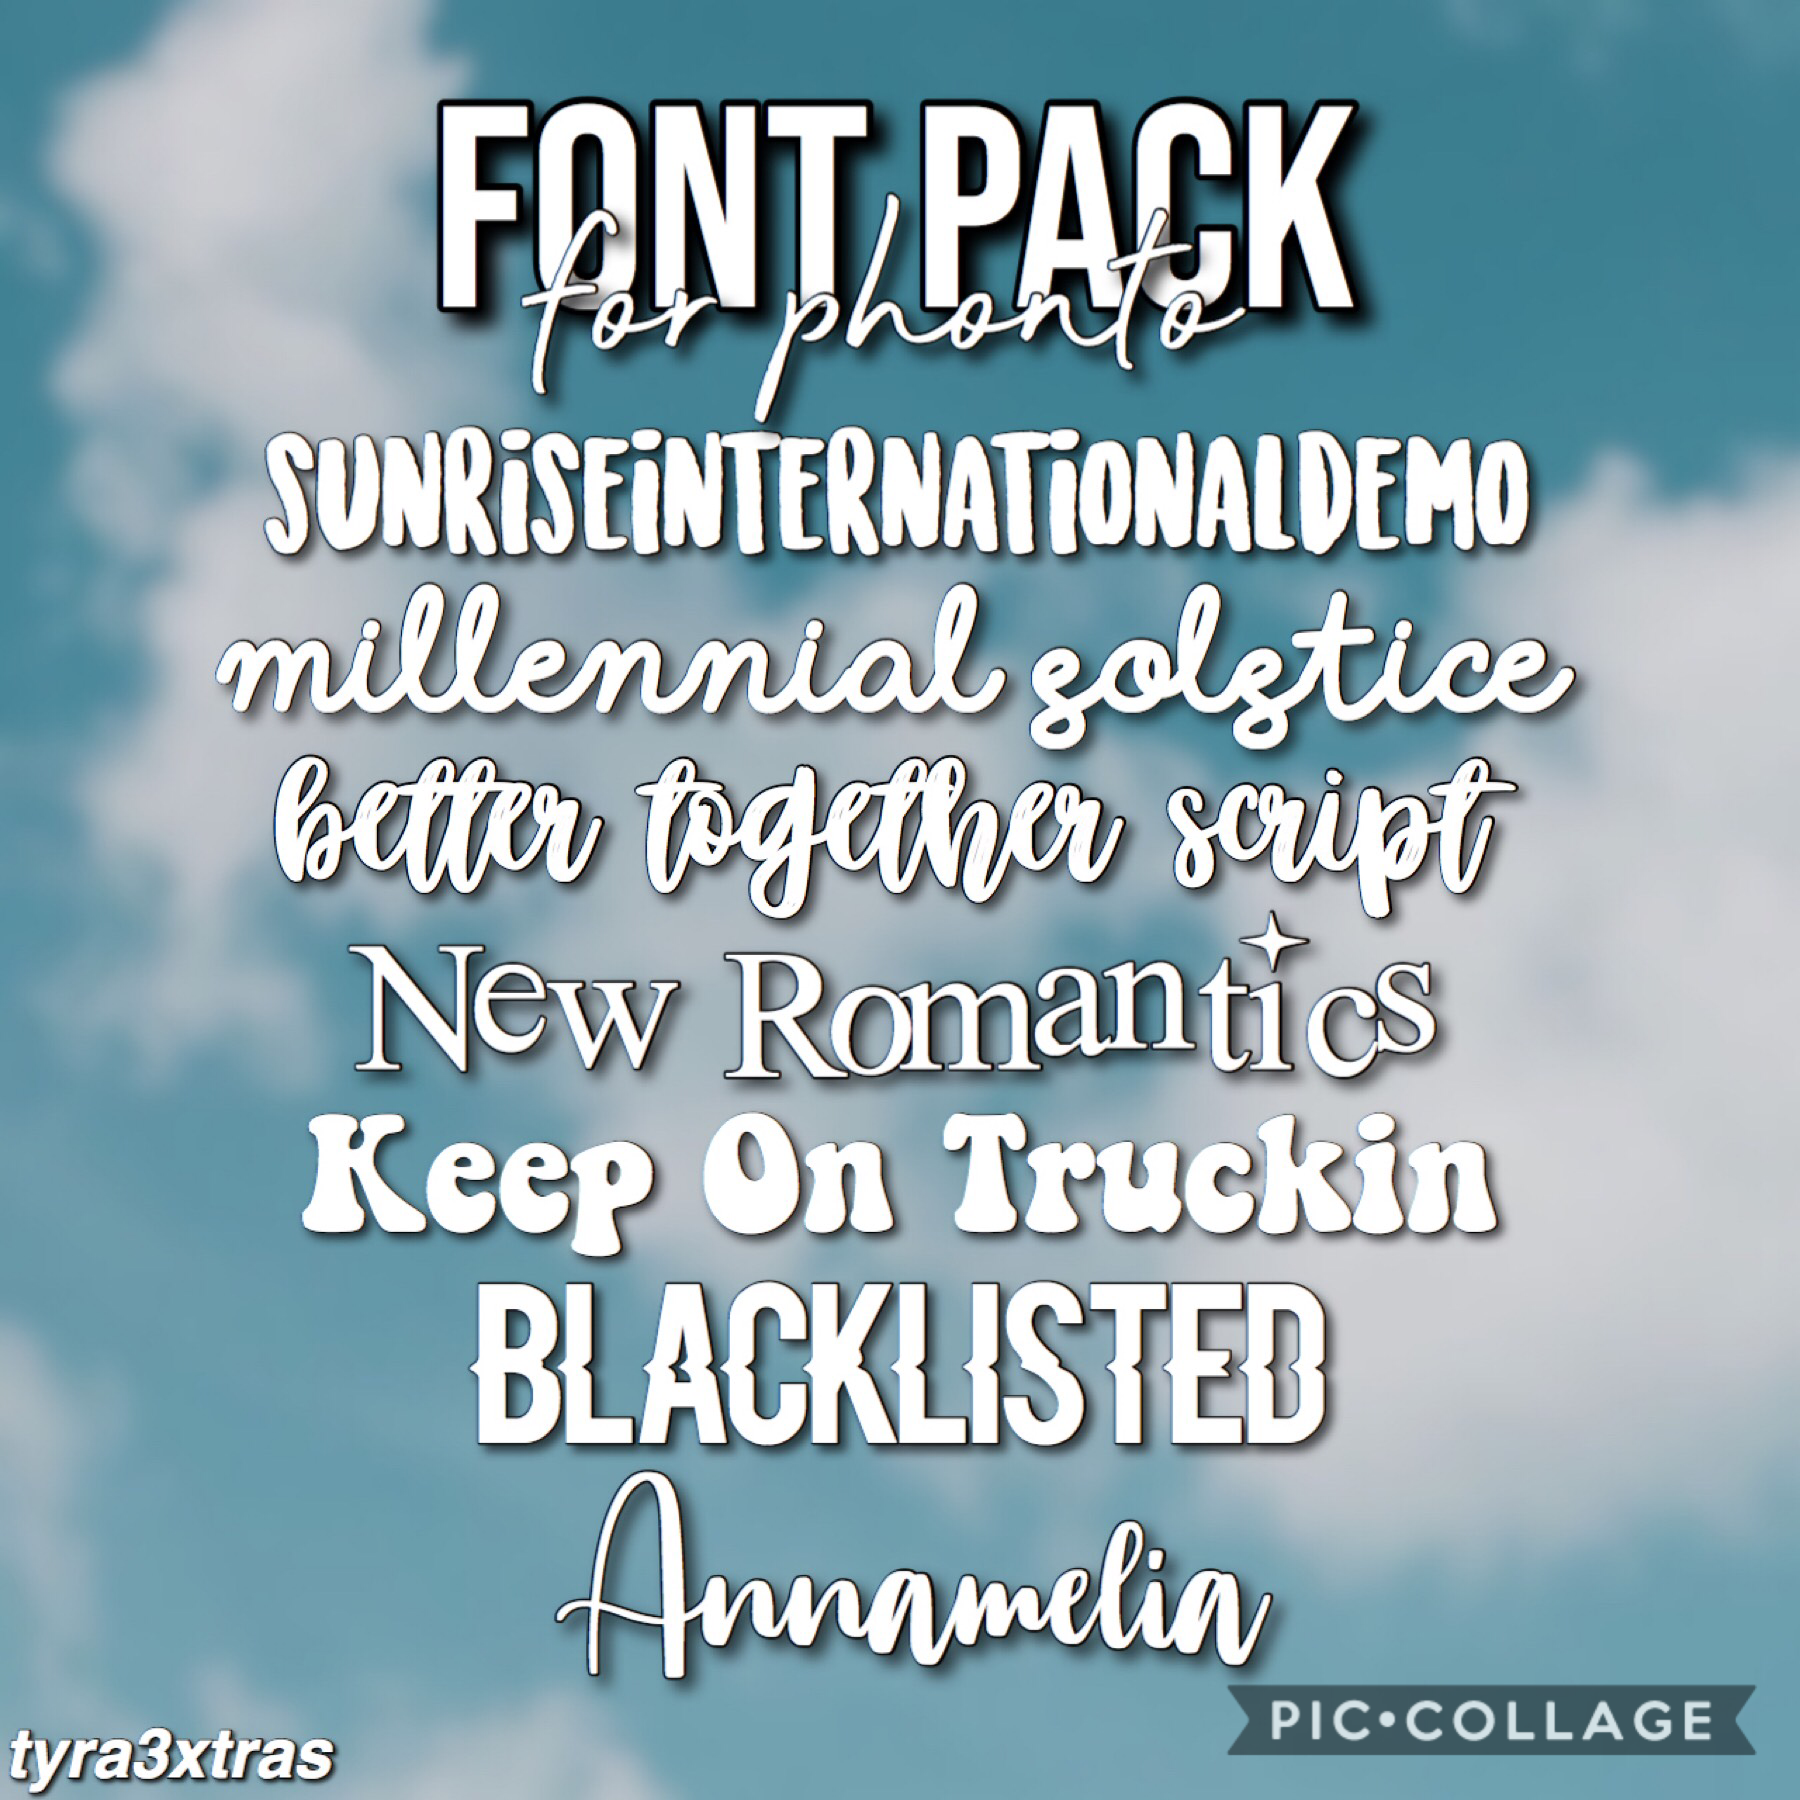 Some of my fave fonts on phonto, also if you’re wondering how to get these, go to dafont.com and search these up then download :))